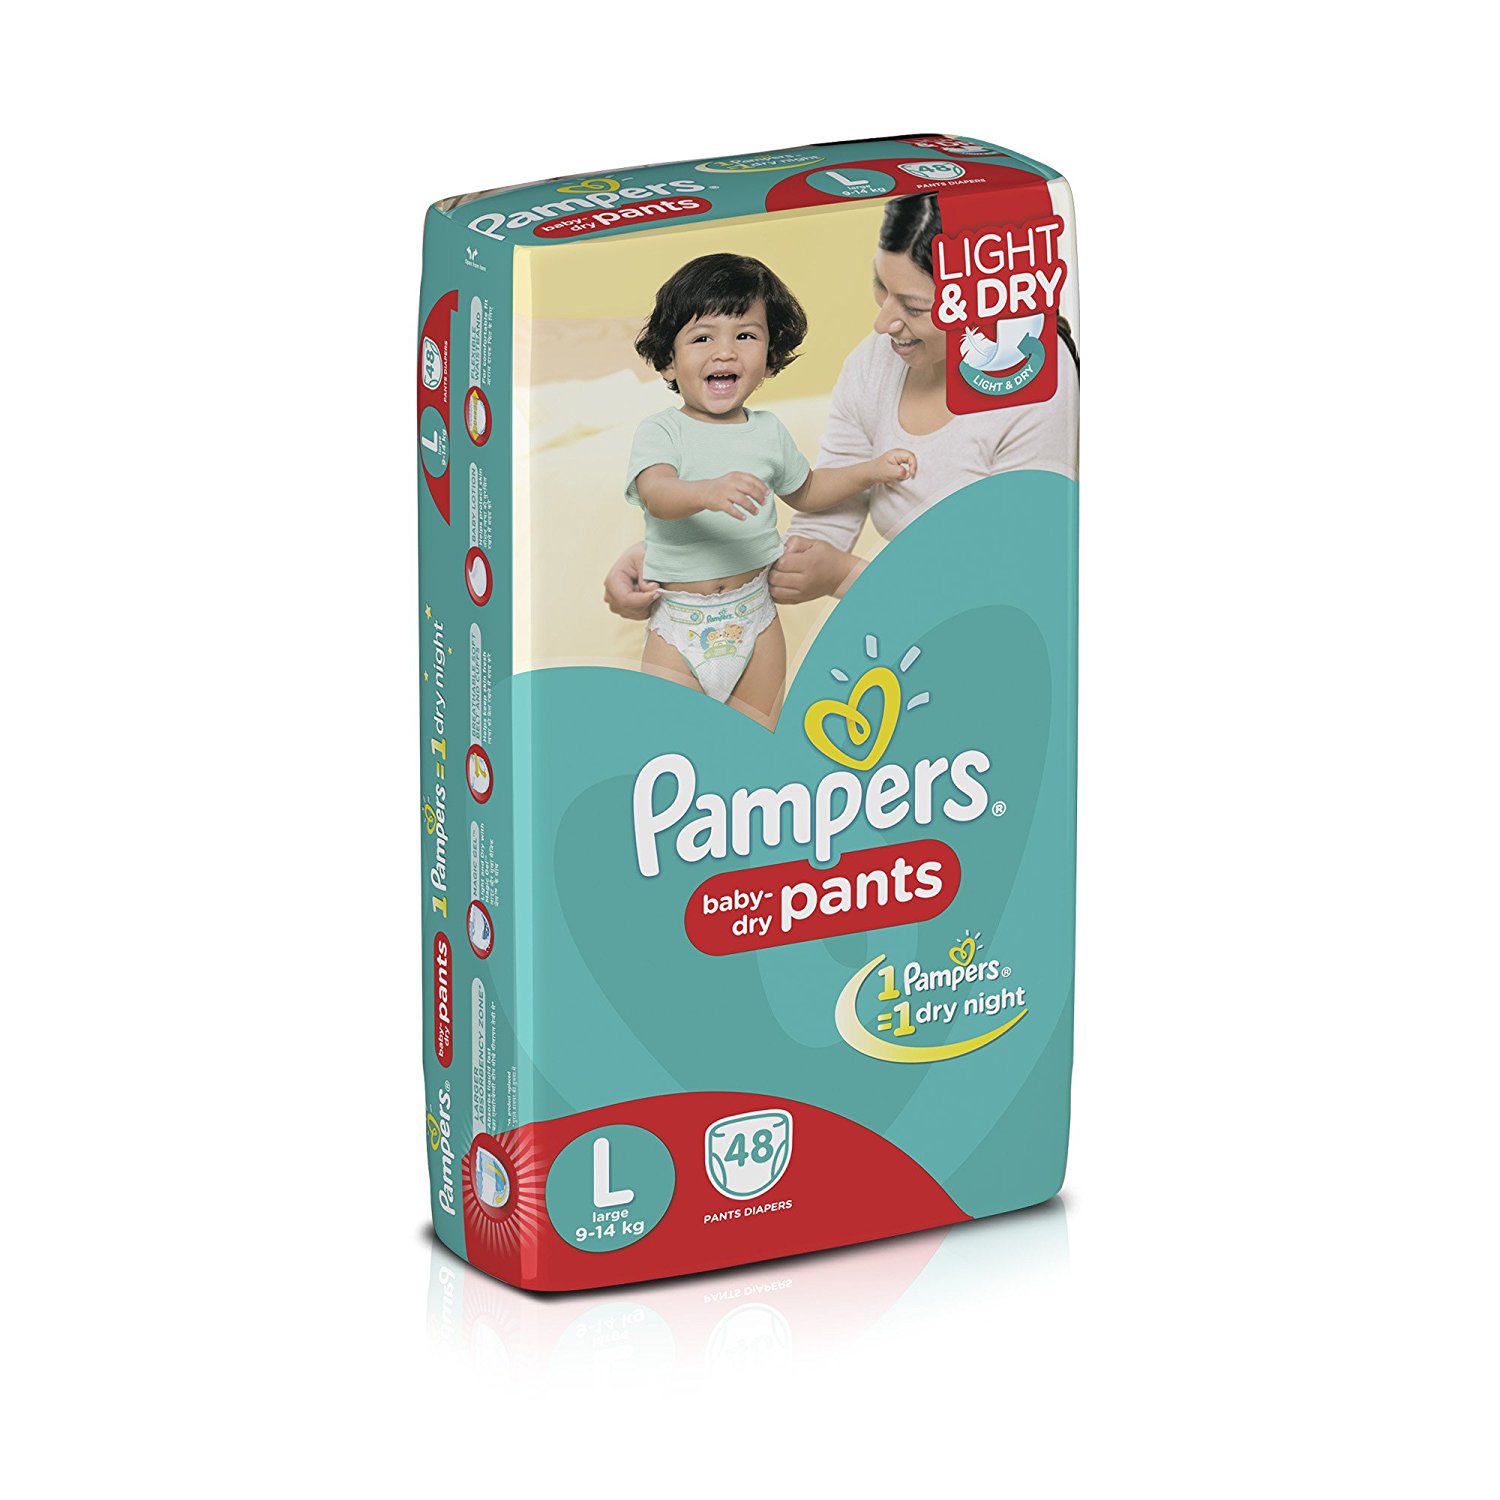 Pampers Large Size Diapers (48 Count)